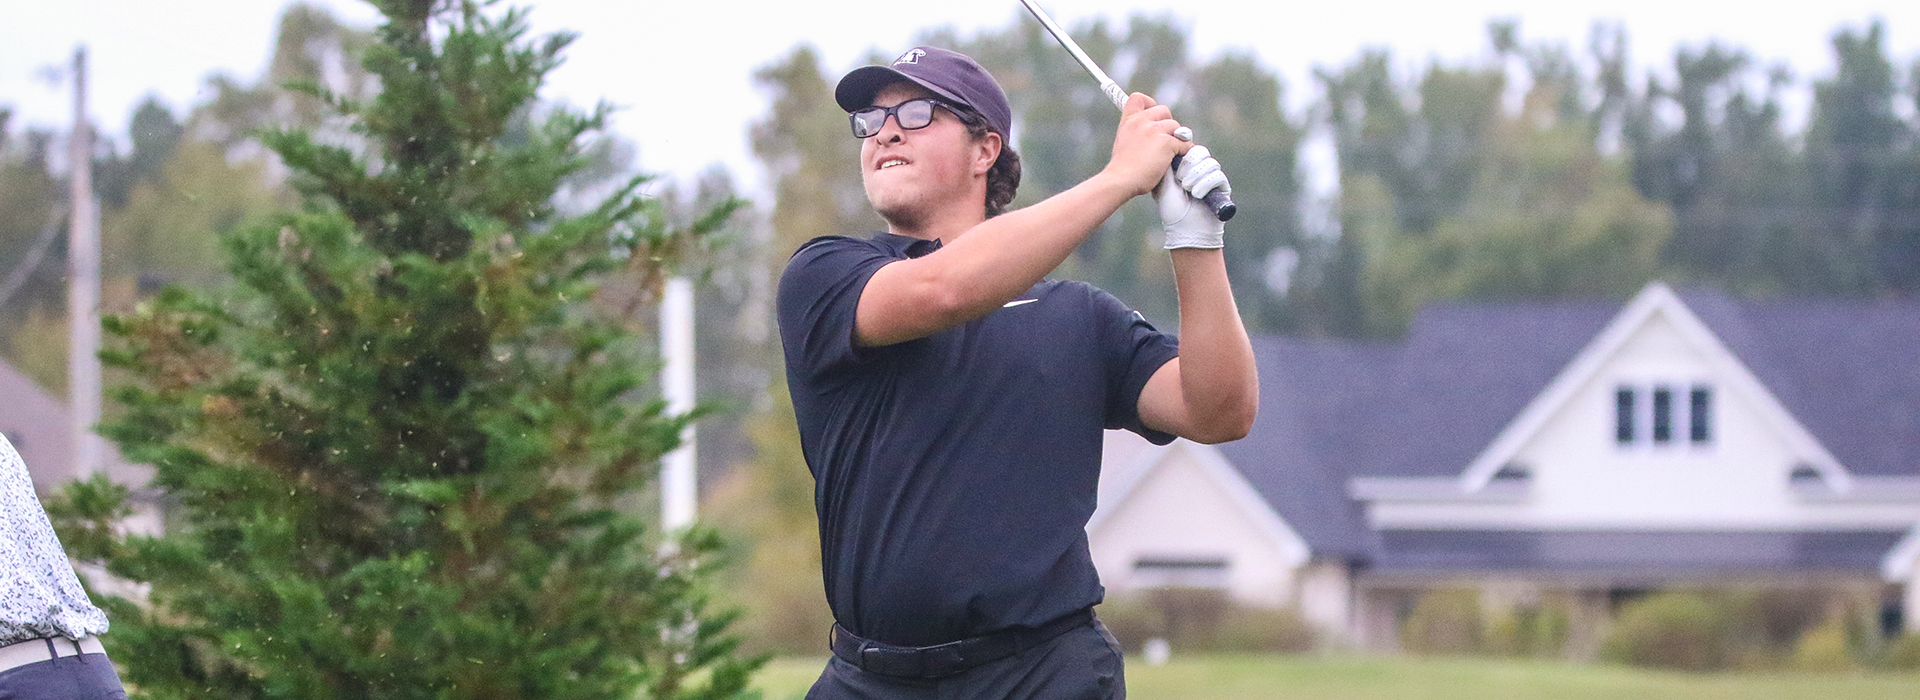 Tech men tied for 10th through round one at Mountaineer Invitational